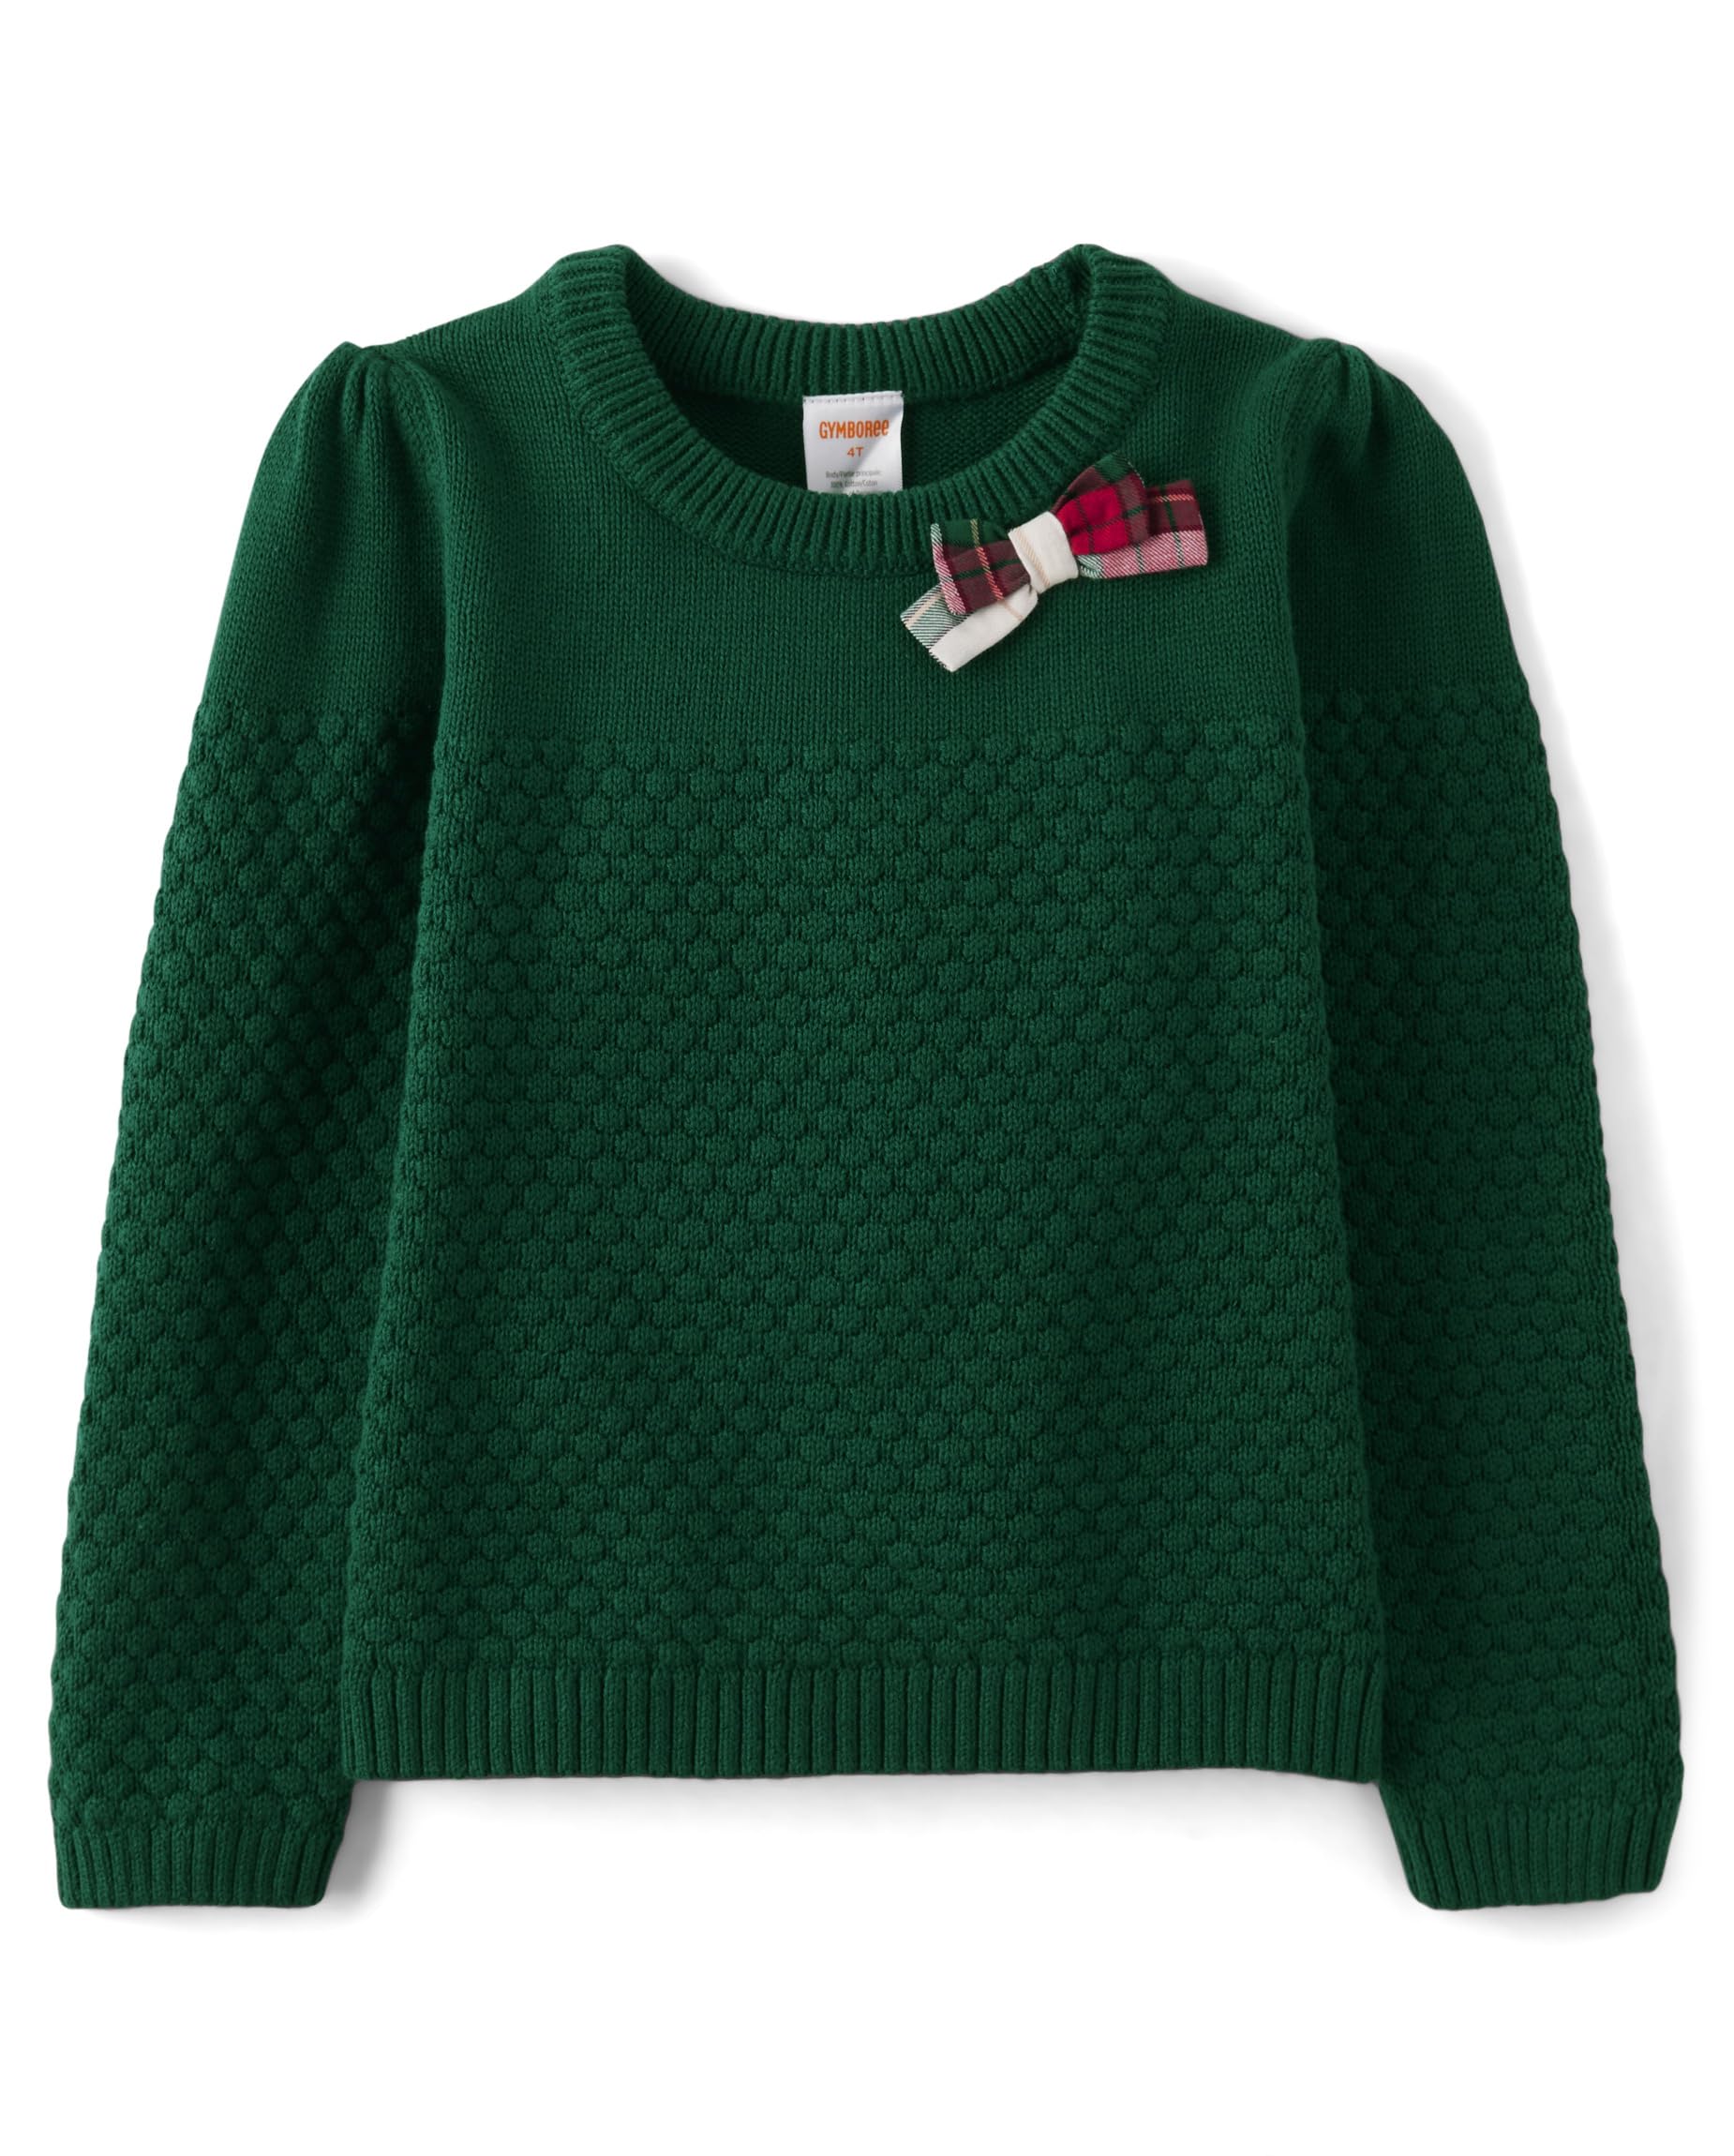 Gymboree,and Toddler Long Sleeve Sweaters,Parisian Chic,7